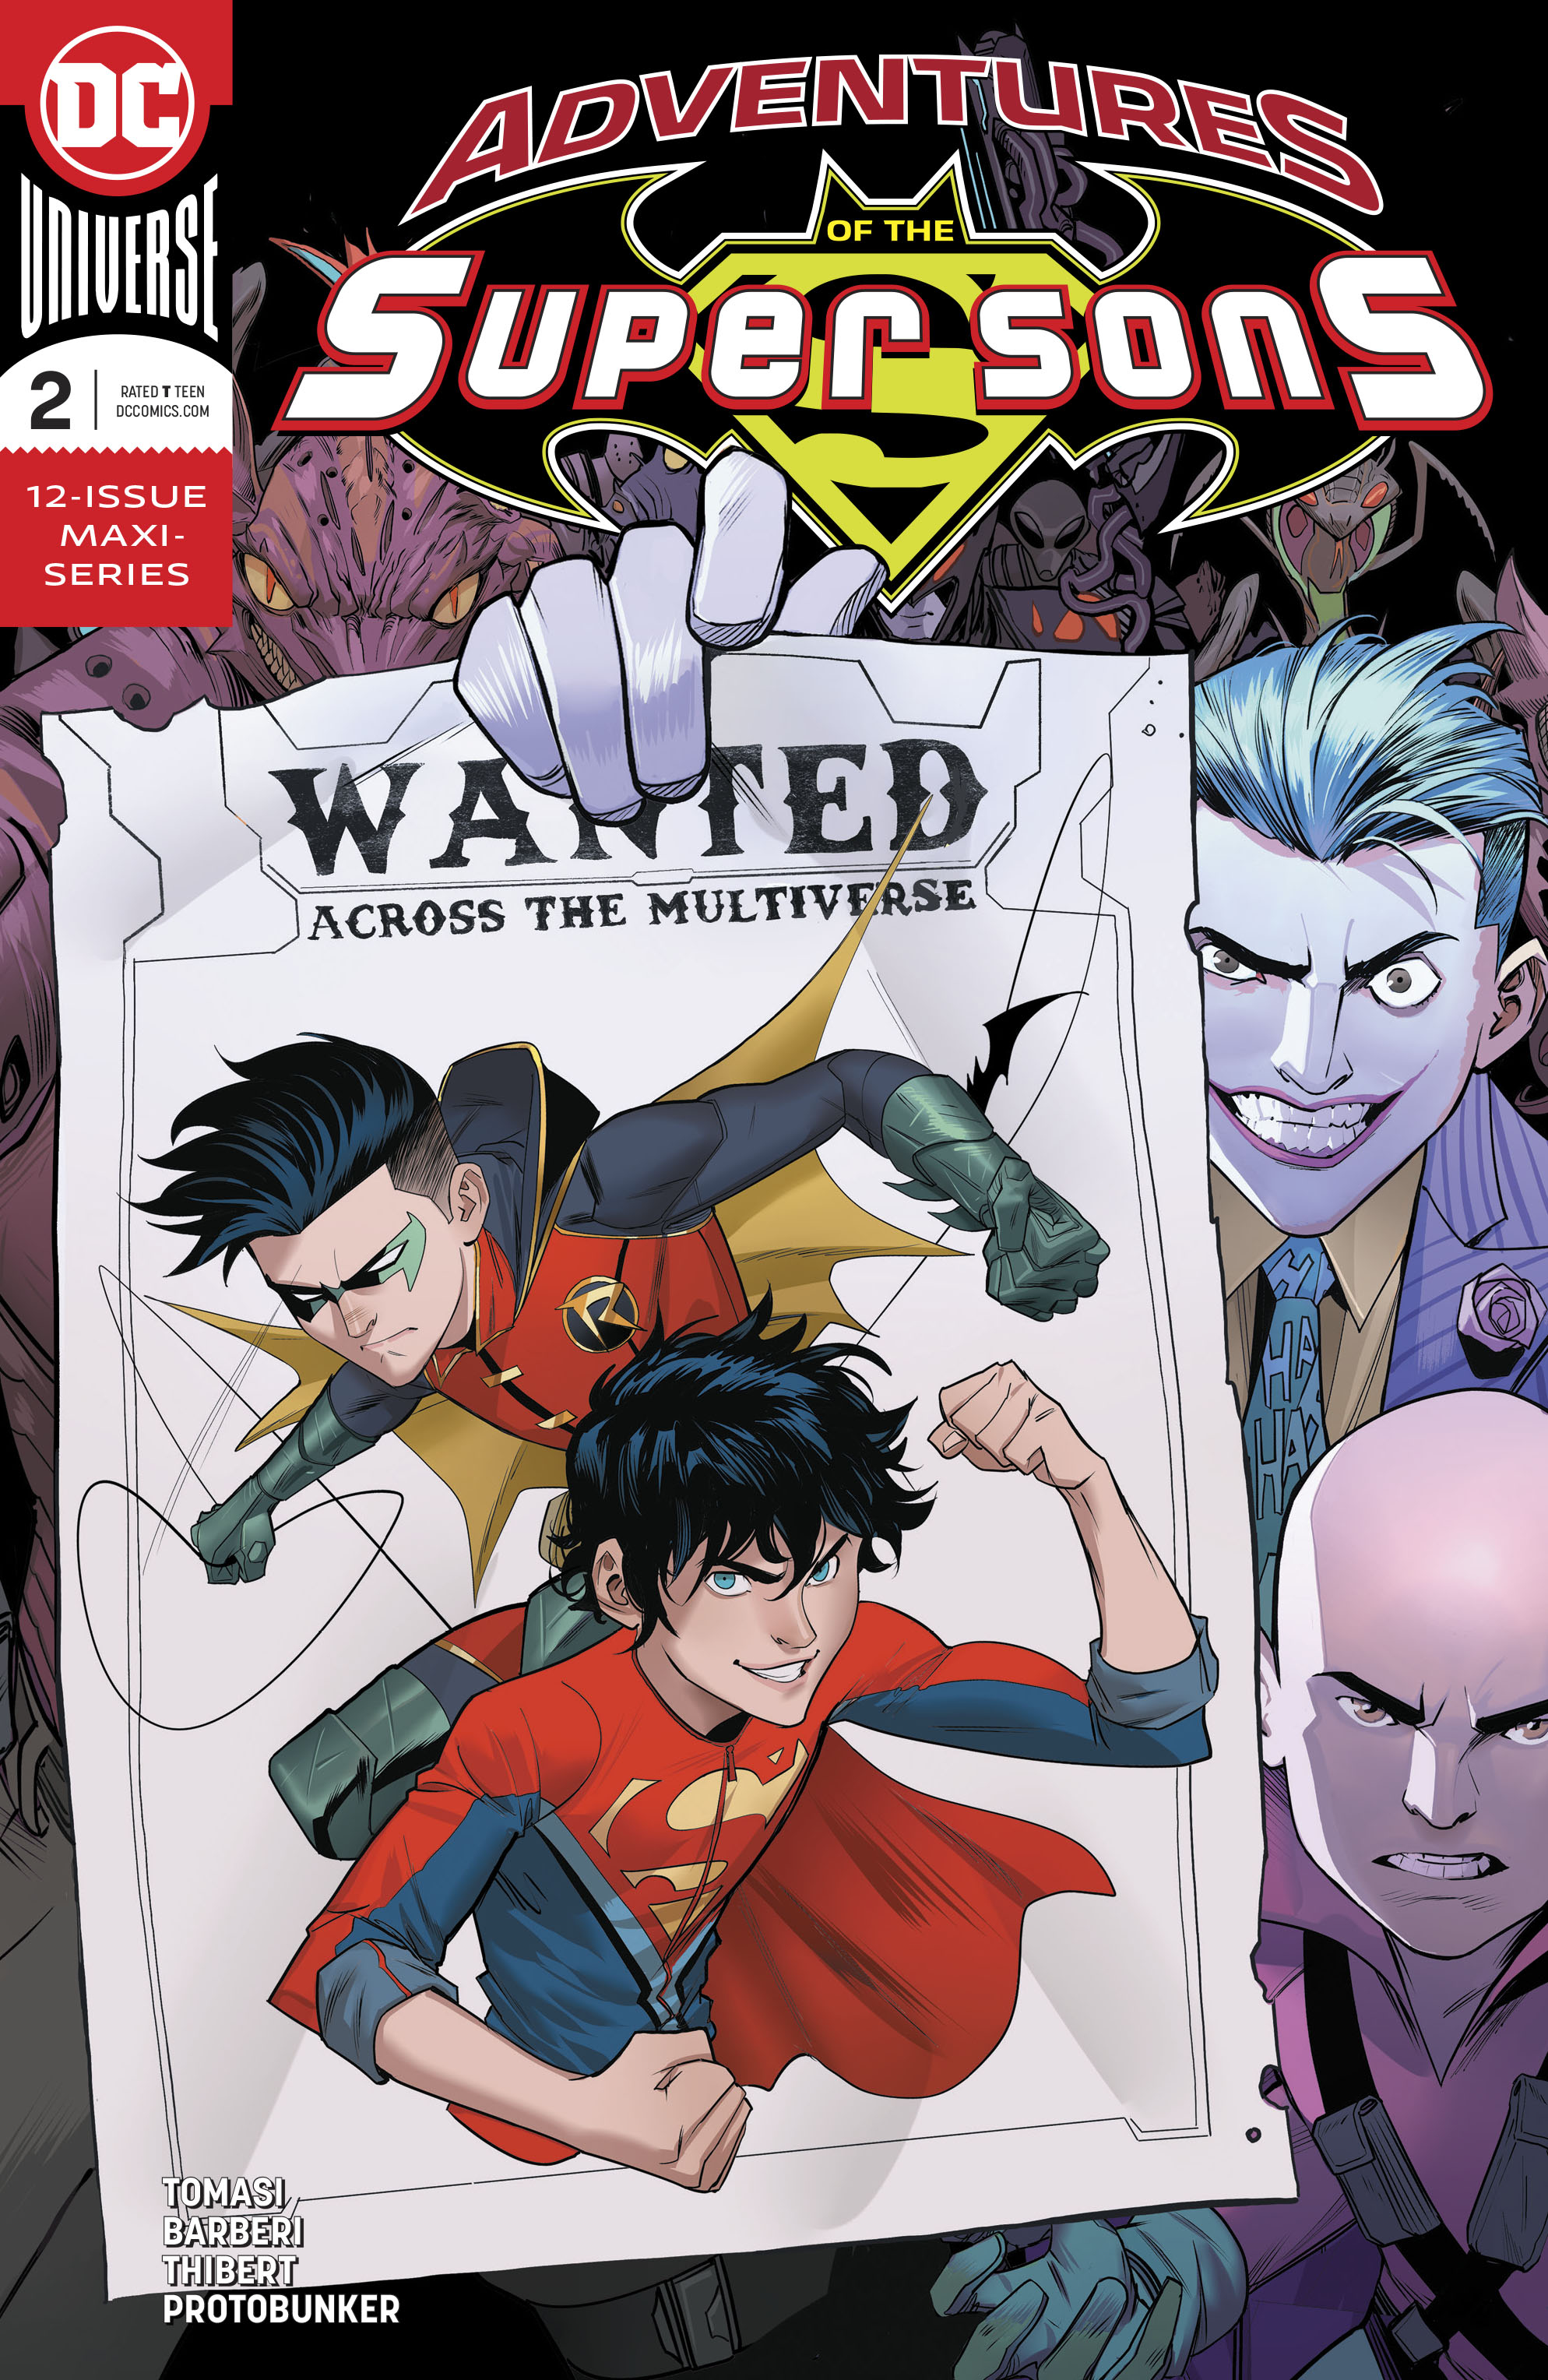 Adventures of the Super Sons no. 2 (2 of 12) (2018 Series)